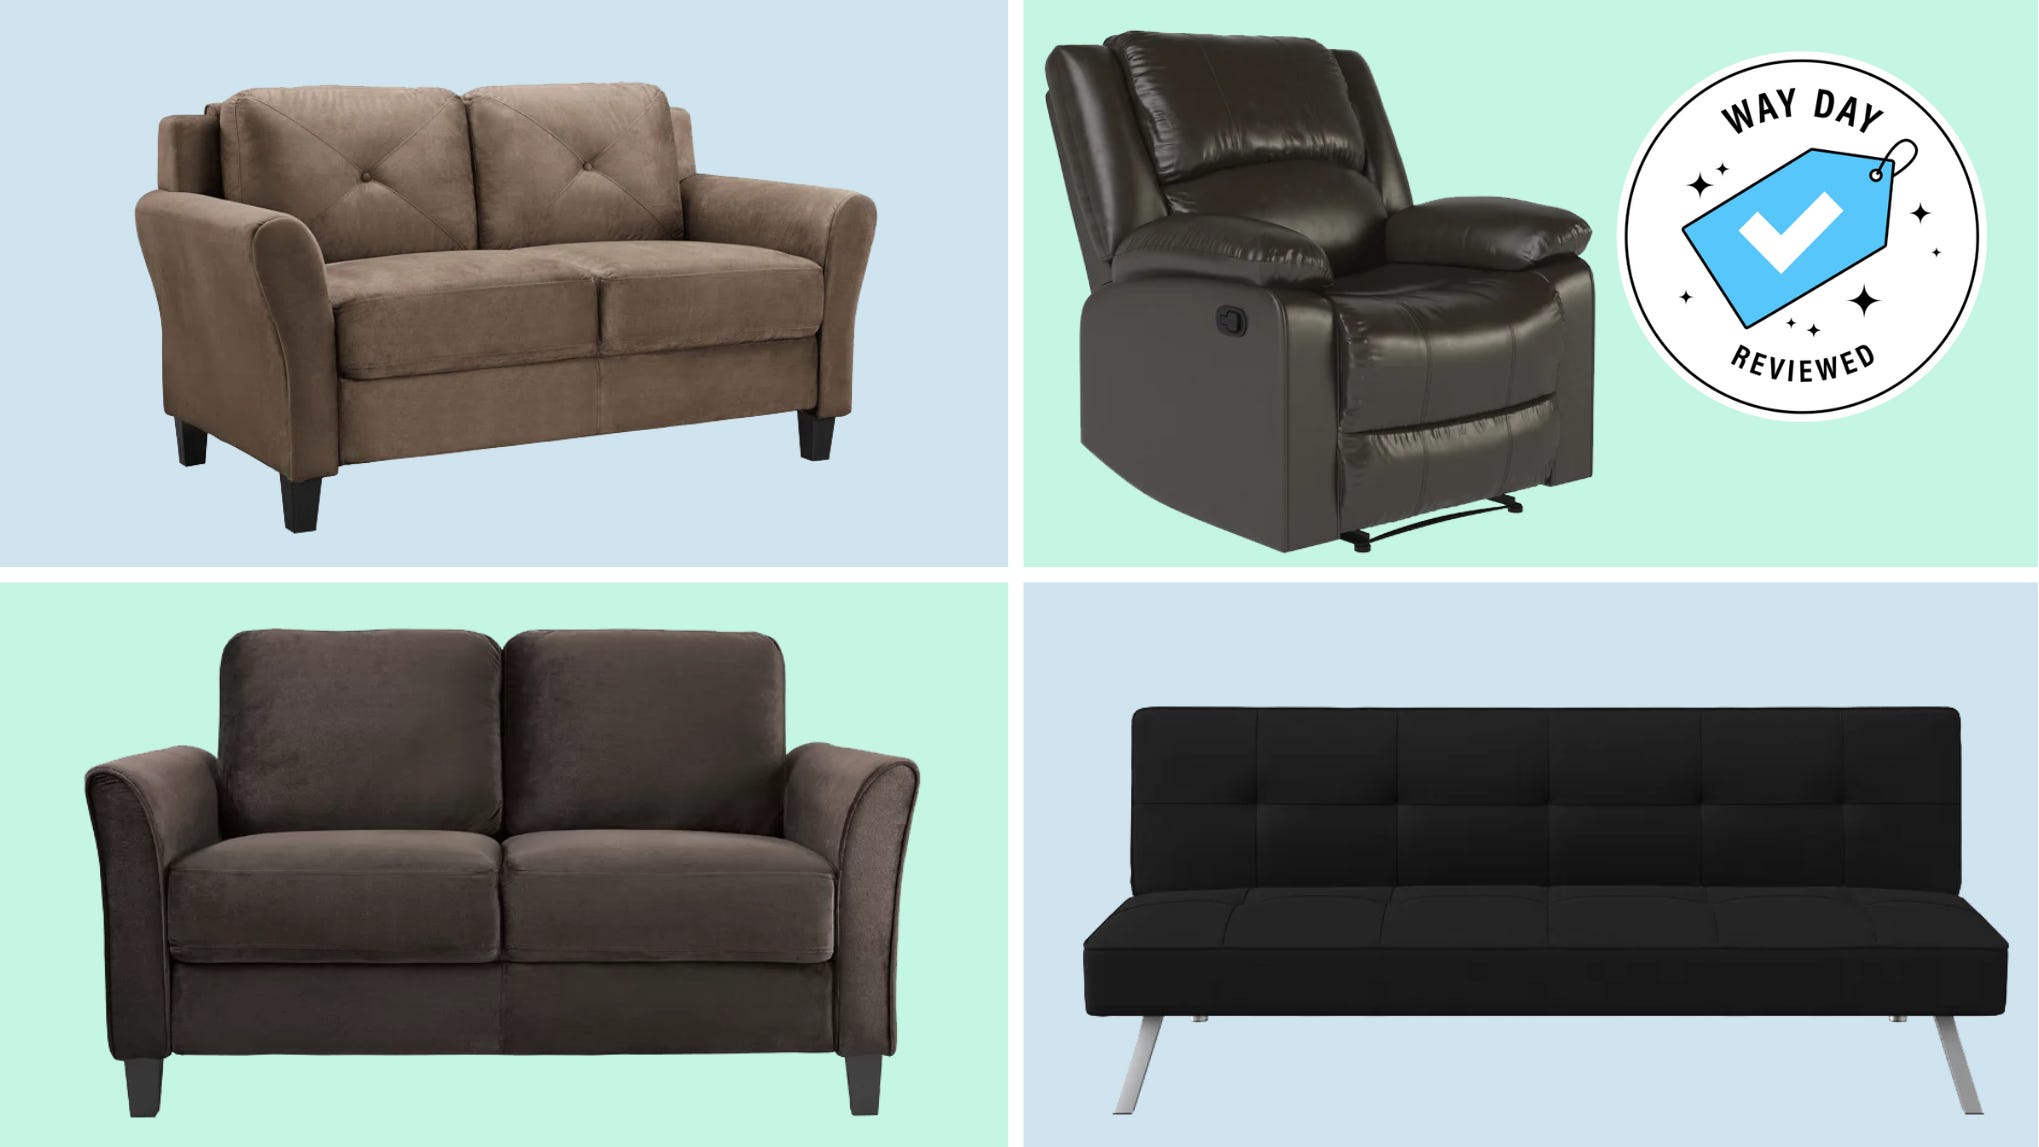 Shop the best Wayfair deals on recliners, sofas and loveseats before Black Friday